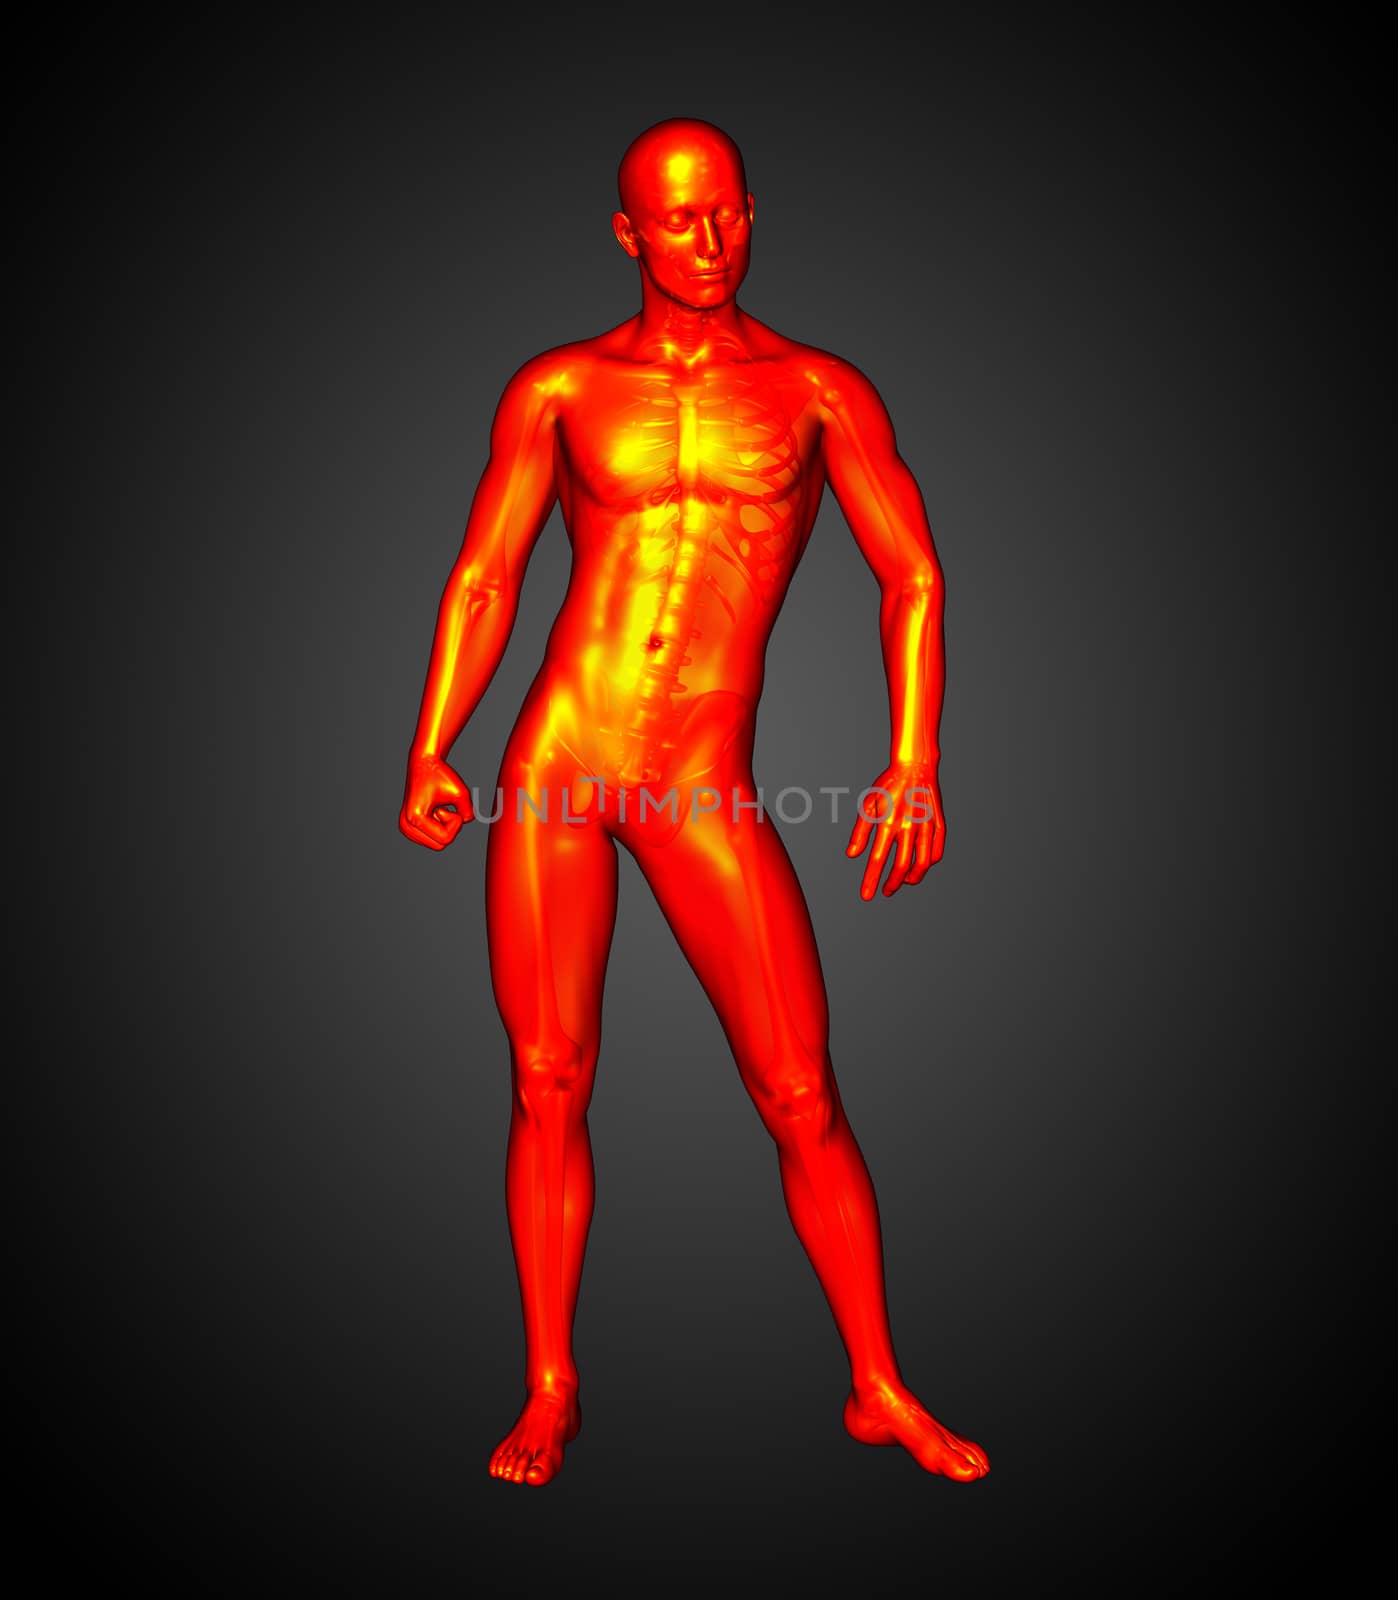 3d render illustration of the human anatomy - front view